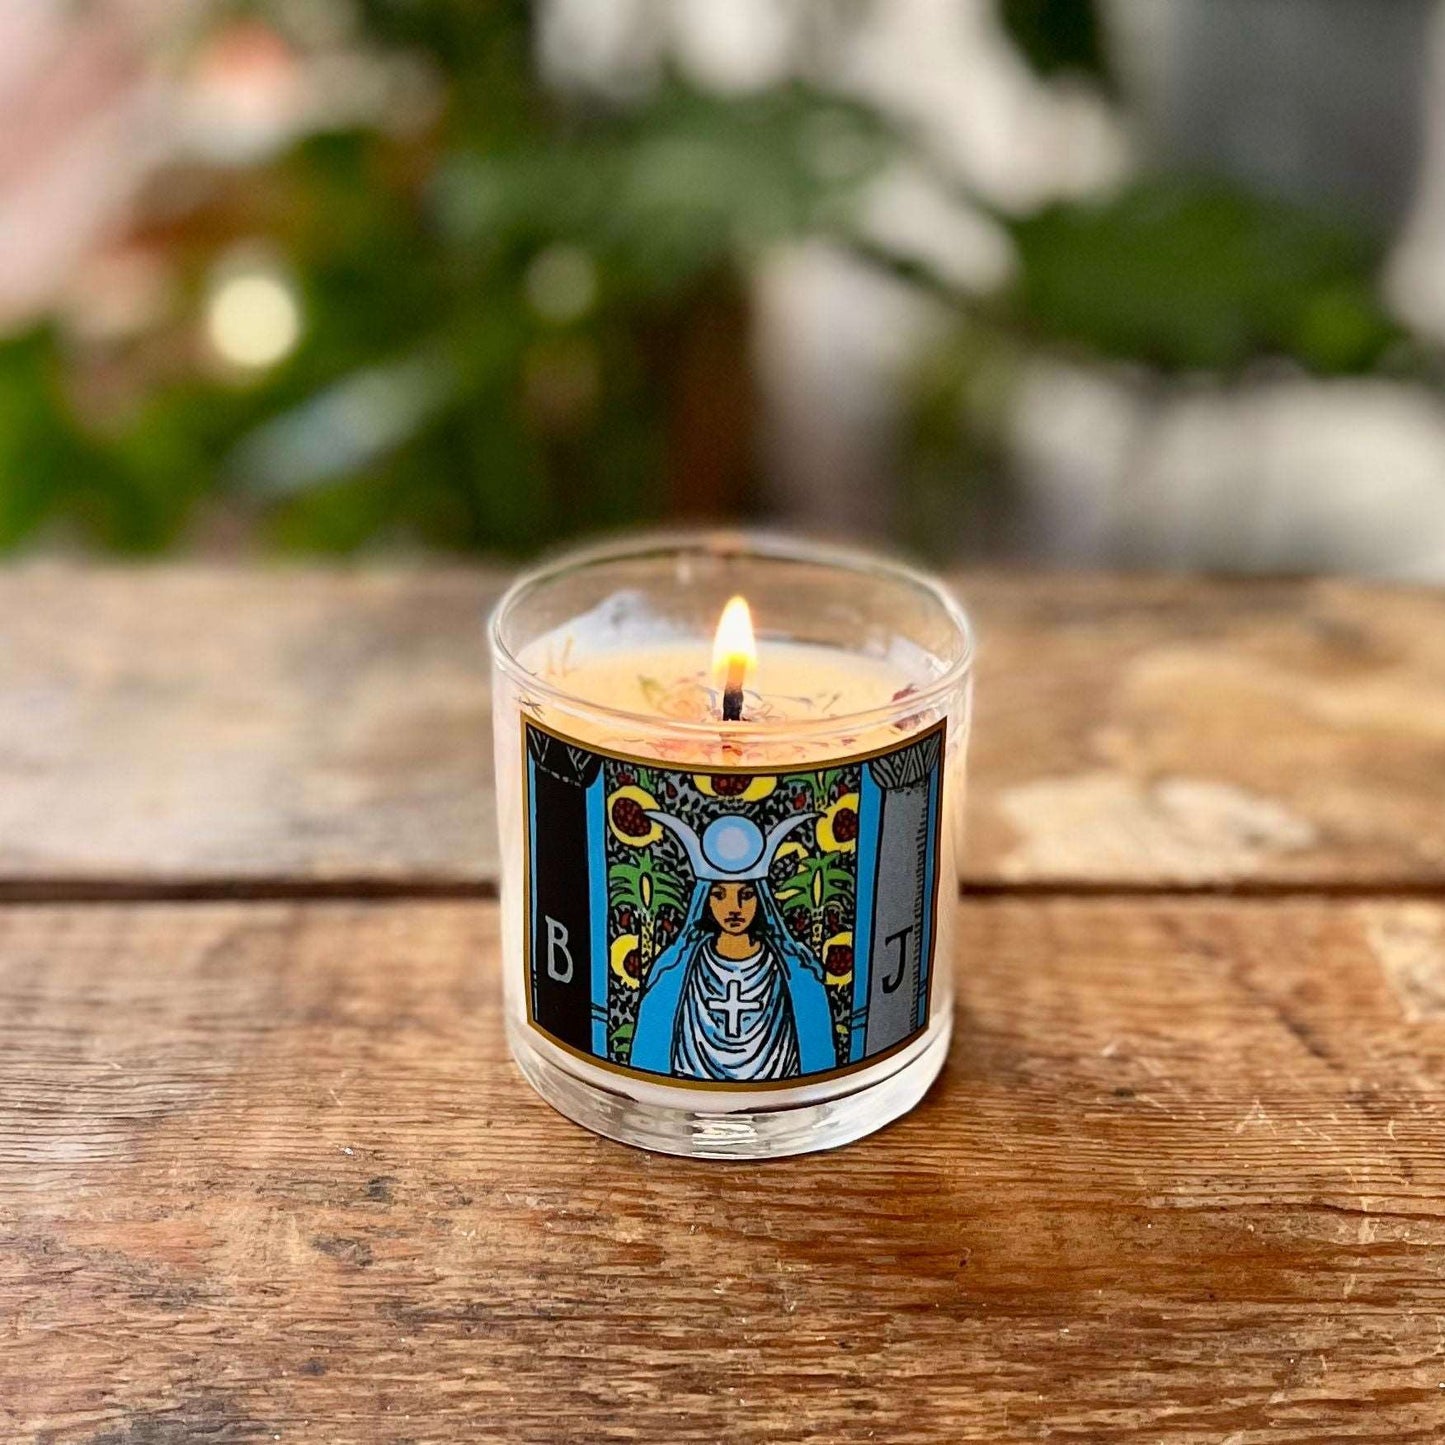 6 oz Natural GMM-Free Soy Wax The High Priestess Tarot Candle for Intuition, Wisdom, and Aromatherapy with Organic Lemongrass, Eucalyptus, Sage Essential Oils, and Amethyst Crystal